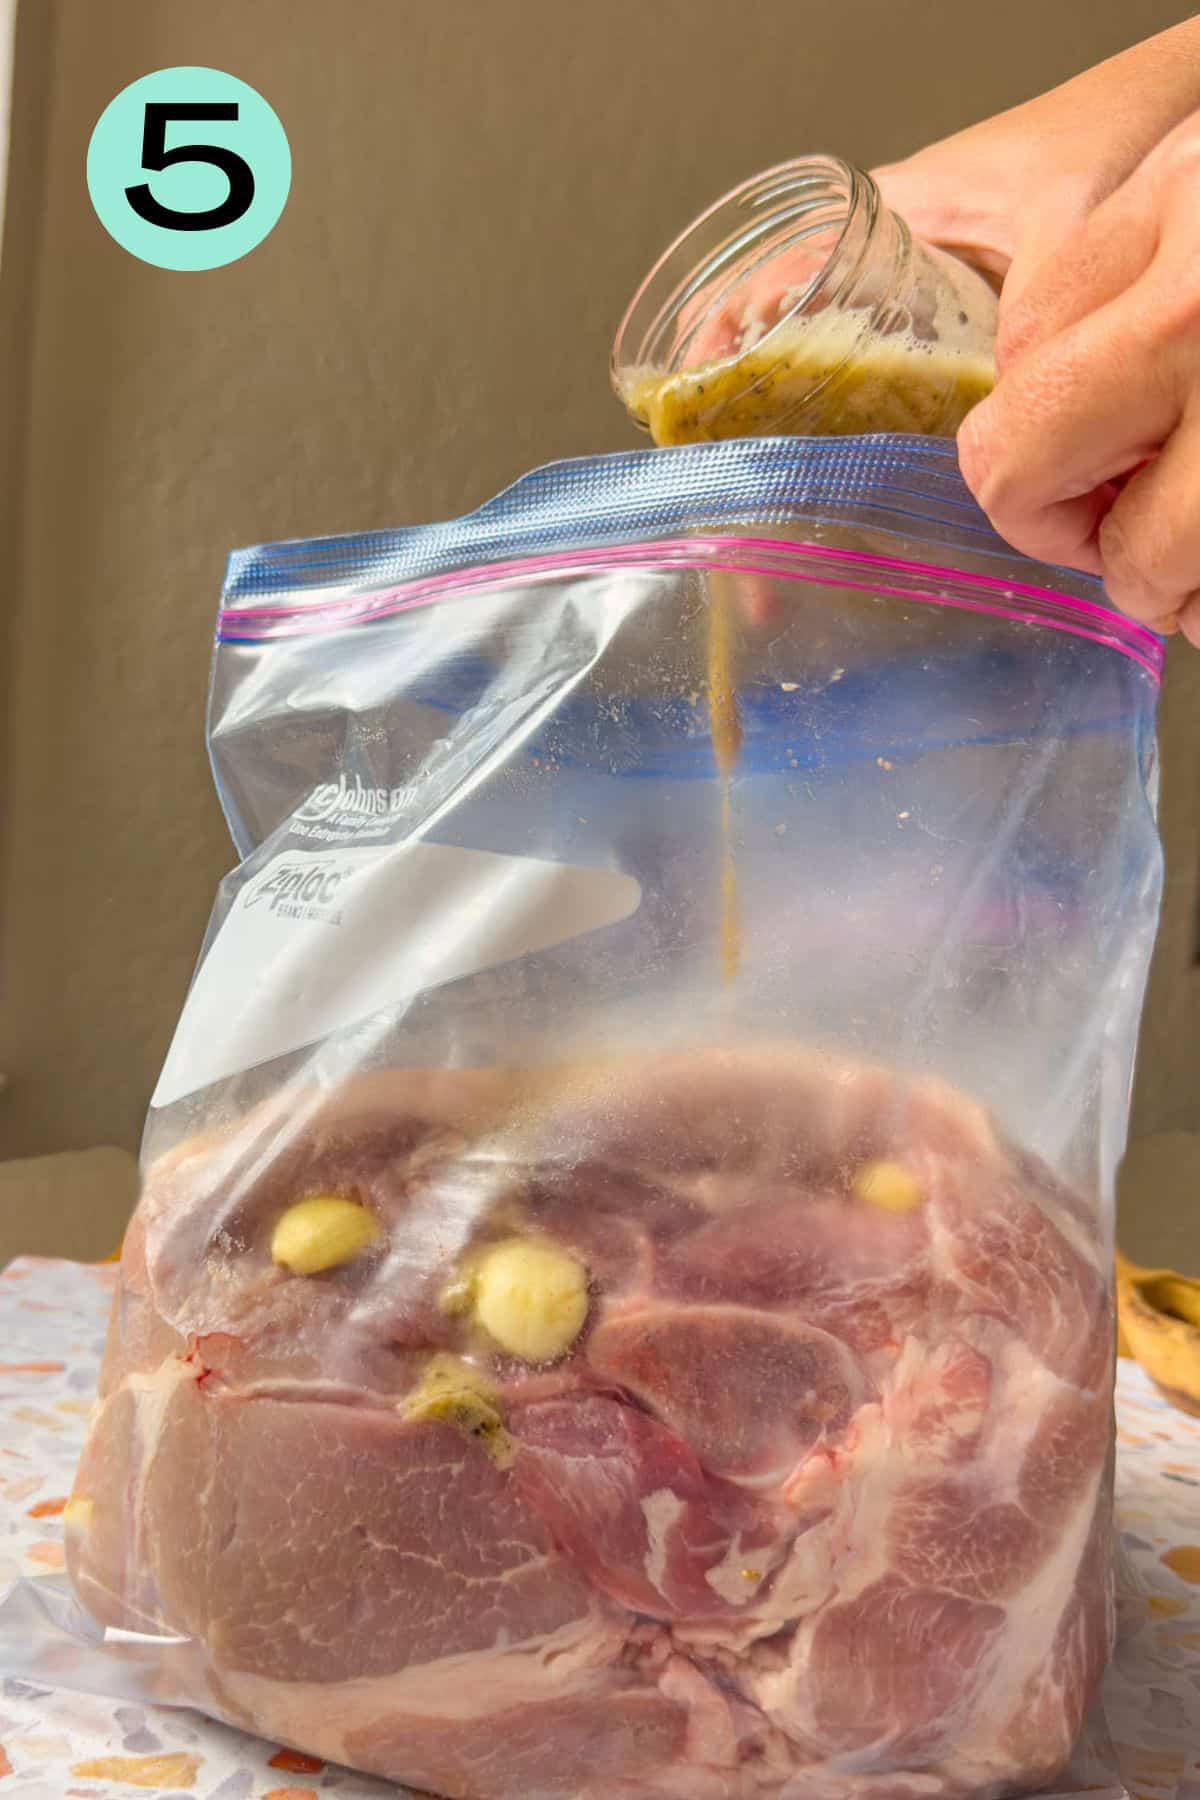 The ziplock bag with the cut of pork is on the table and mojo marinade is being poured into the bag.